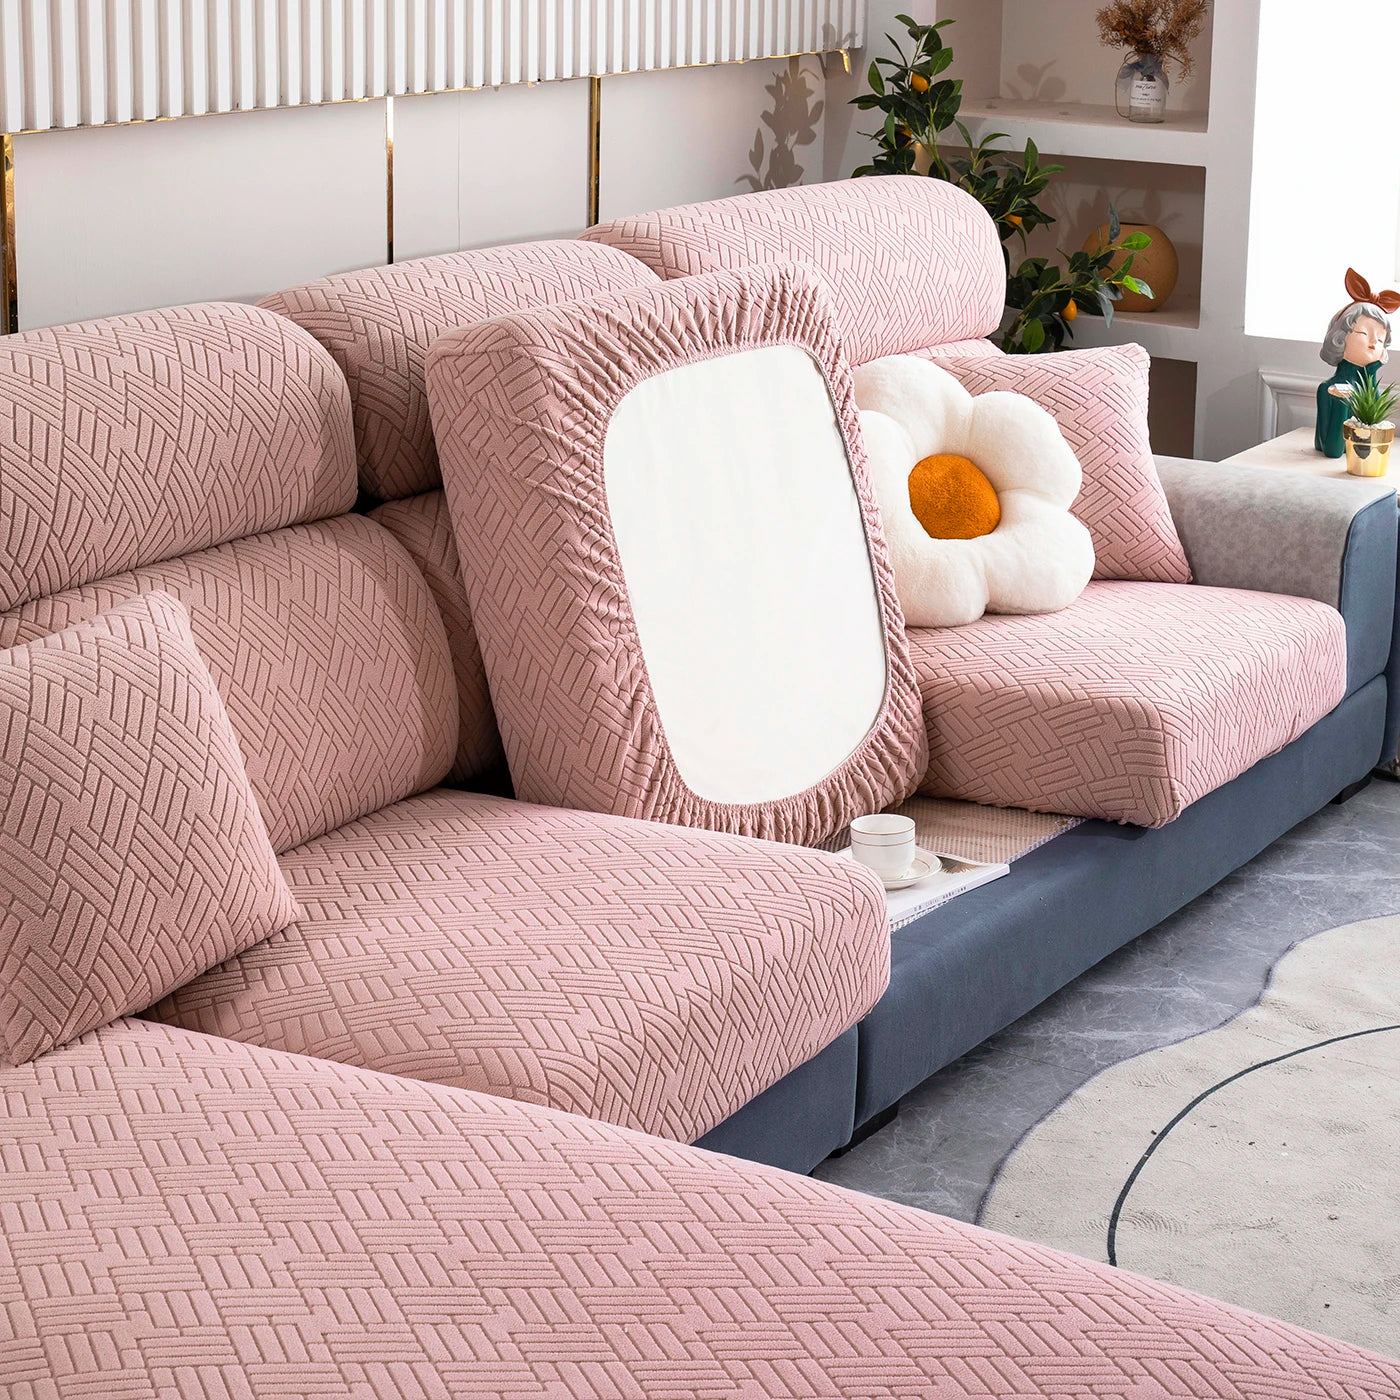 Sofa Cover Jacquard Sofa Cushion Cover for Living Room Thicken Seat Chair Cover Adjustable Couch Cover Pets Kids Furniture Protector ShopOnlyDeal